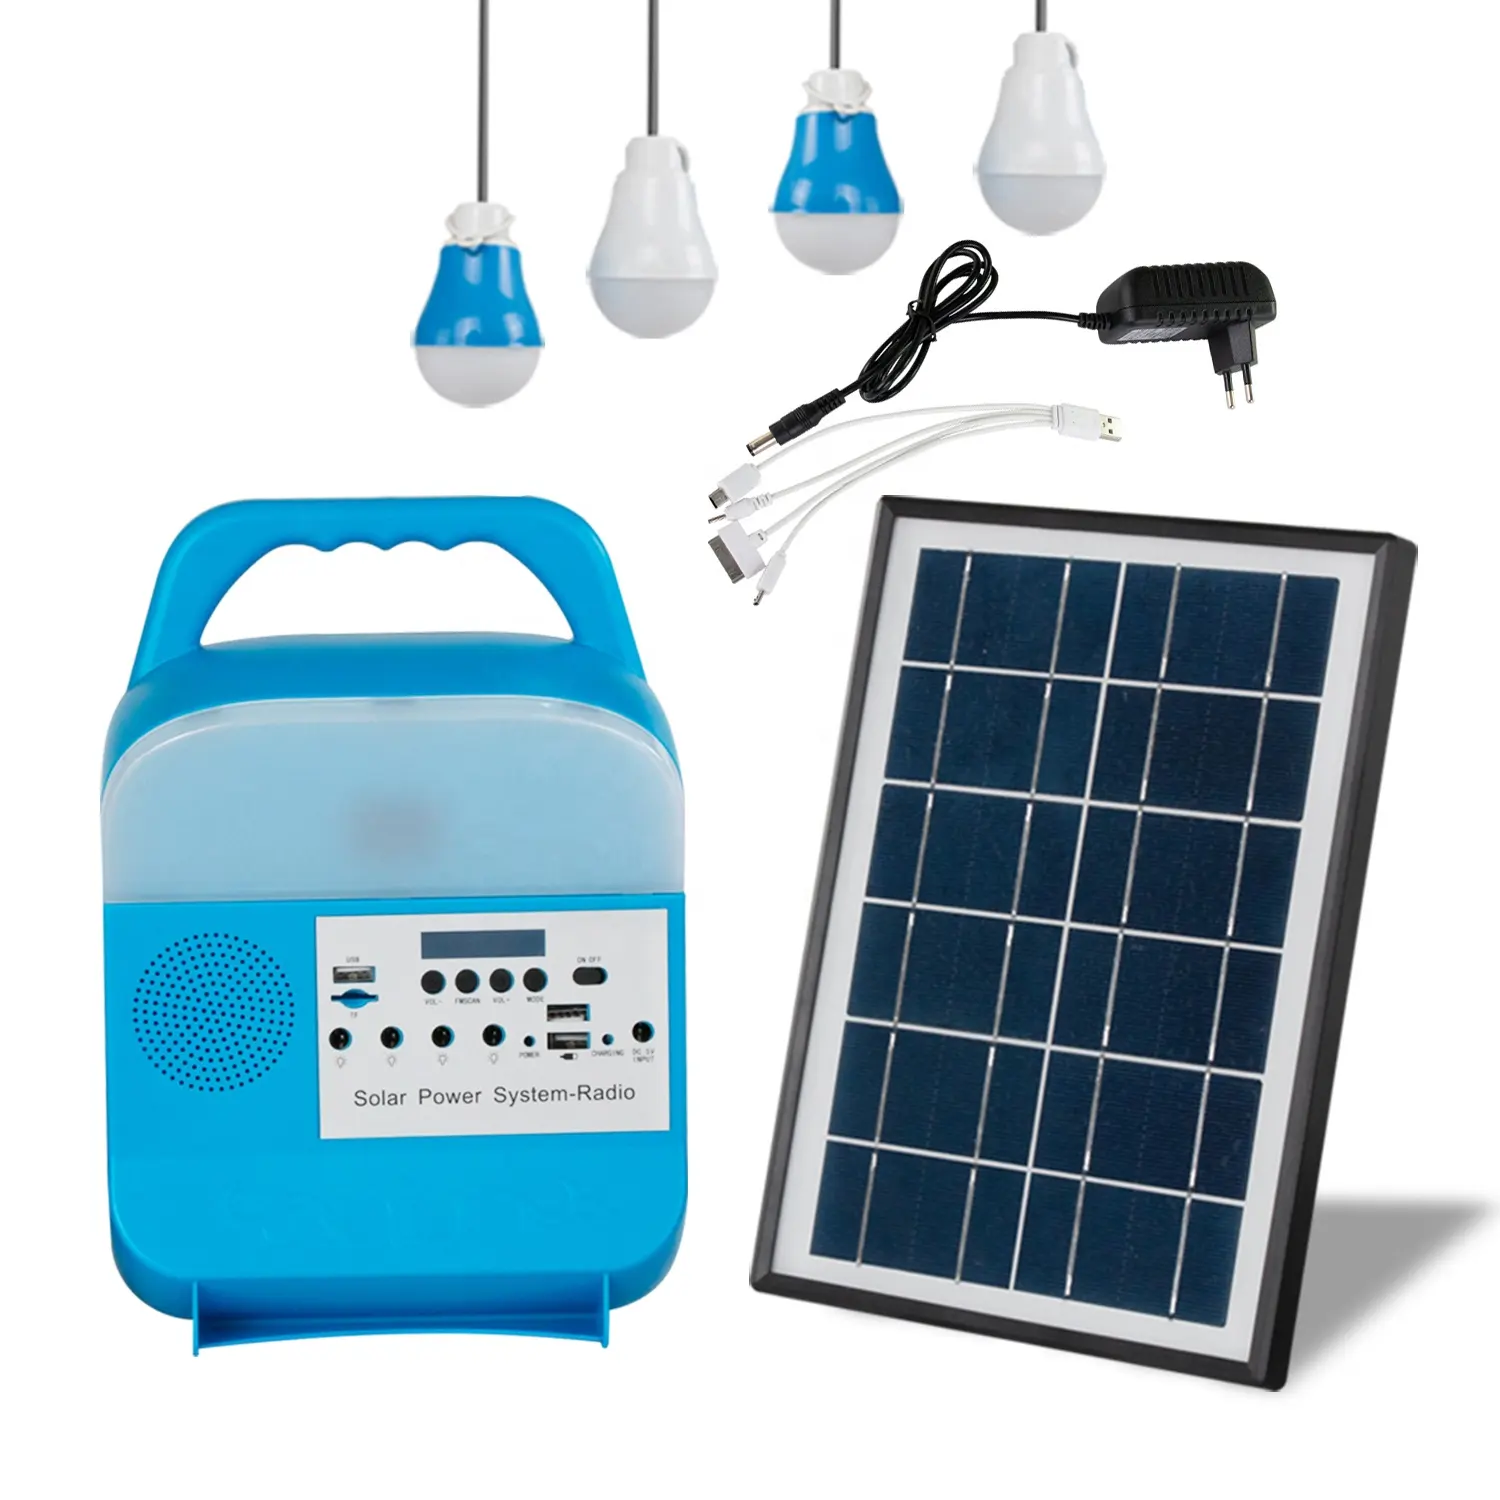 Emergency Standby Power Generation Lighting Solar Power System with MP3 Portable Off Grid Small Solar Power Station Solar Light